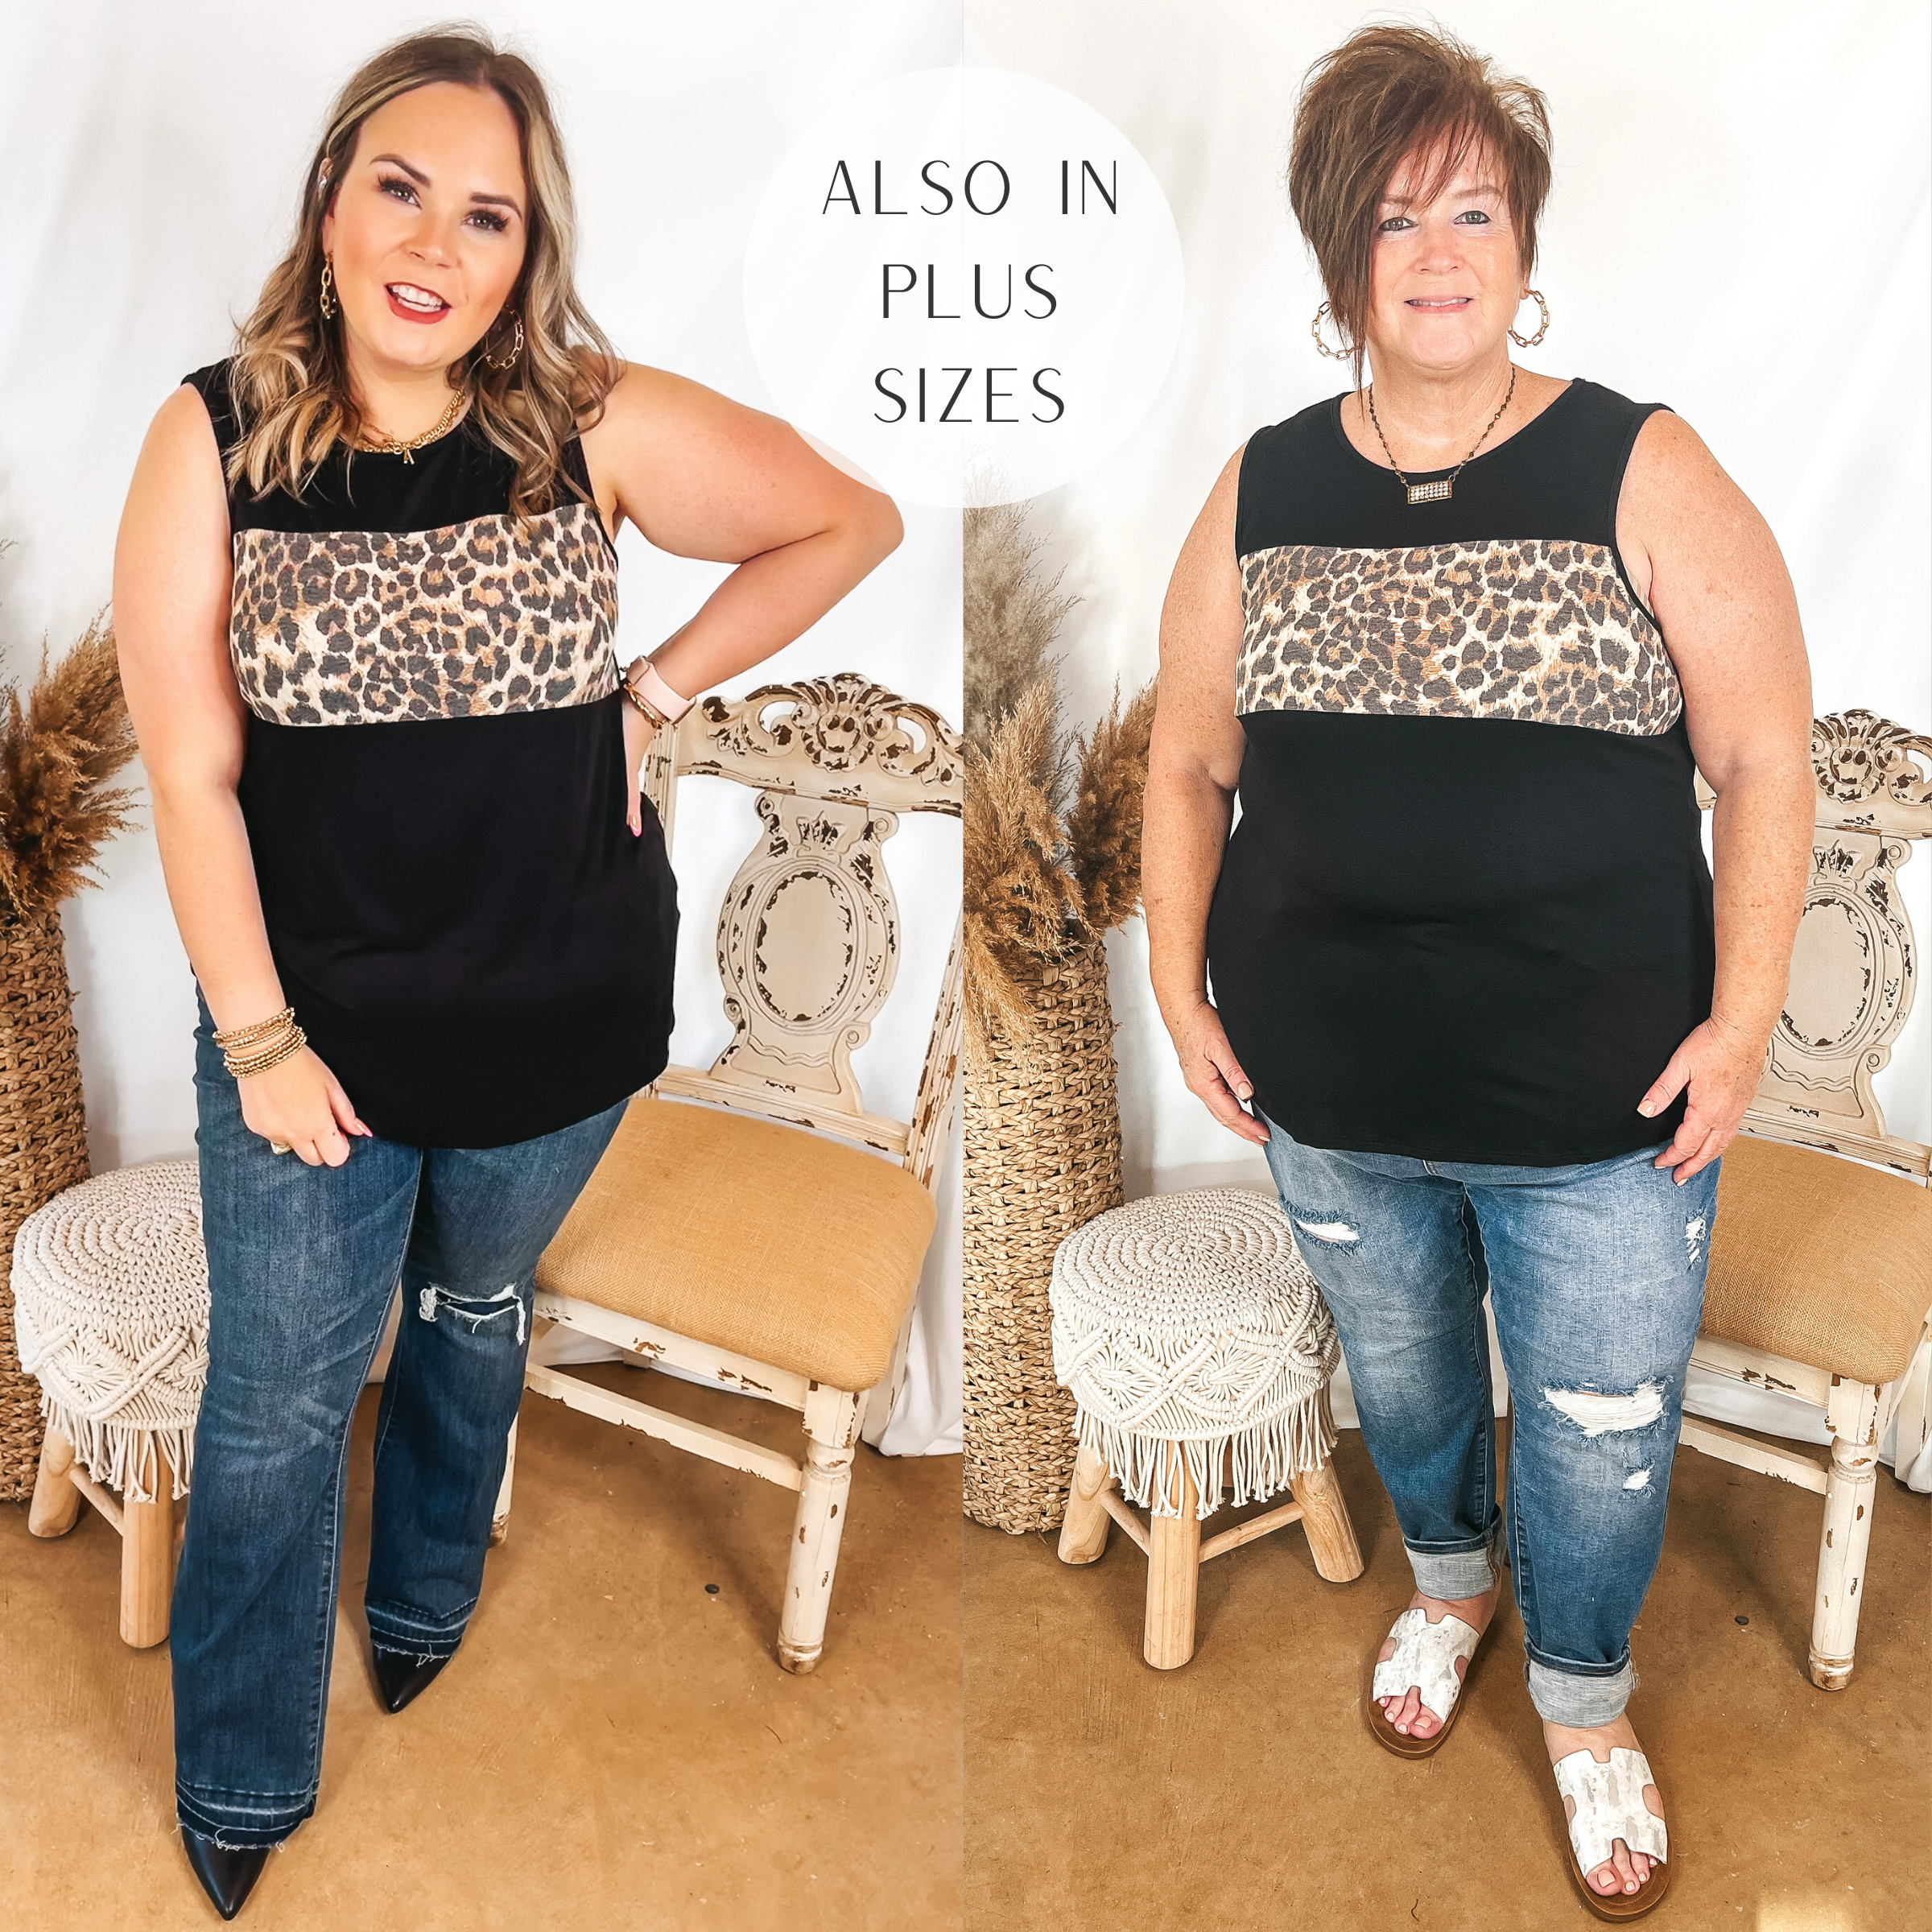 Models are wearing a black tank top with a leopard print bust. Size large model has it paired with boyfriend jeans, black booties, and gold jewelry. Plus size model has it paired with boyfriend jeans, white sandals, and gold jewelry.